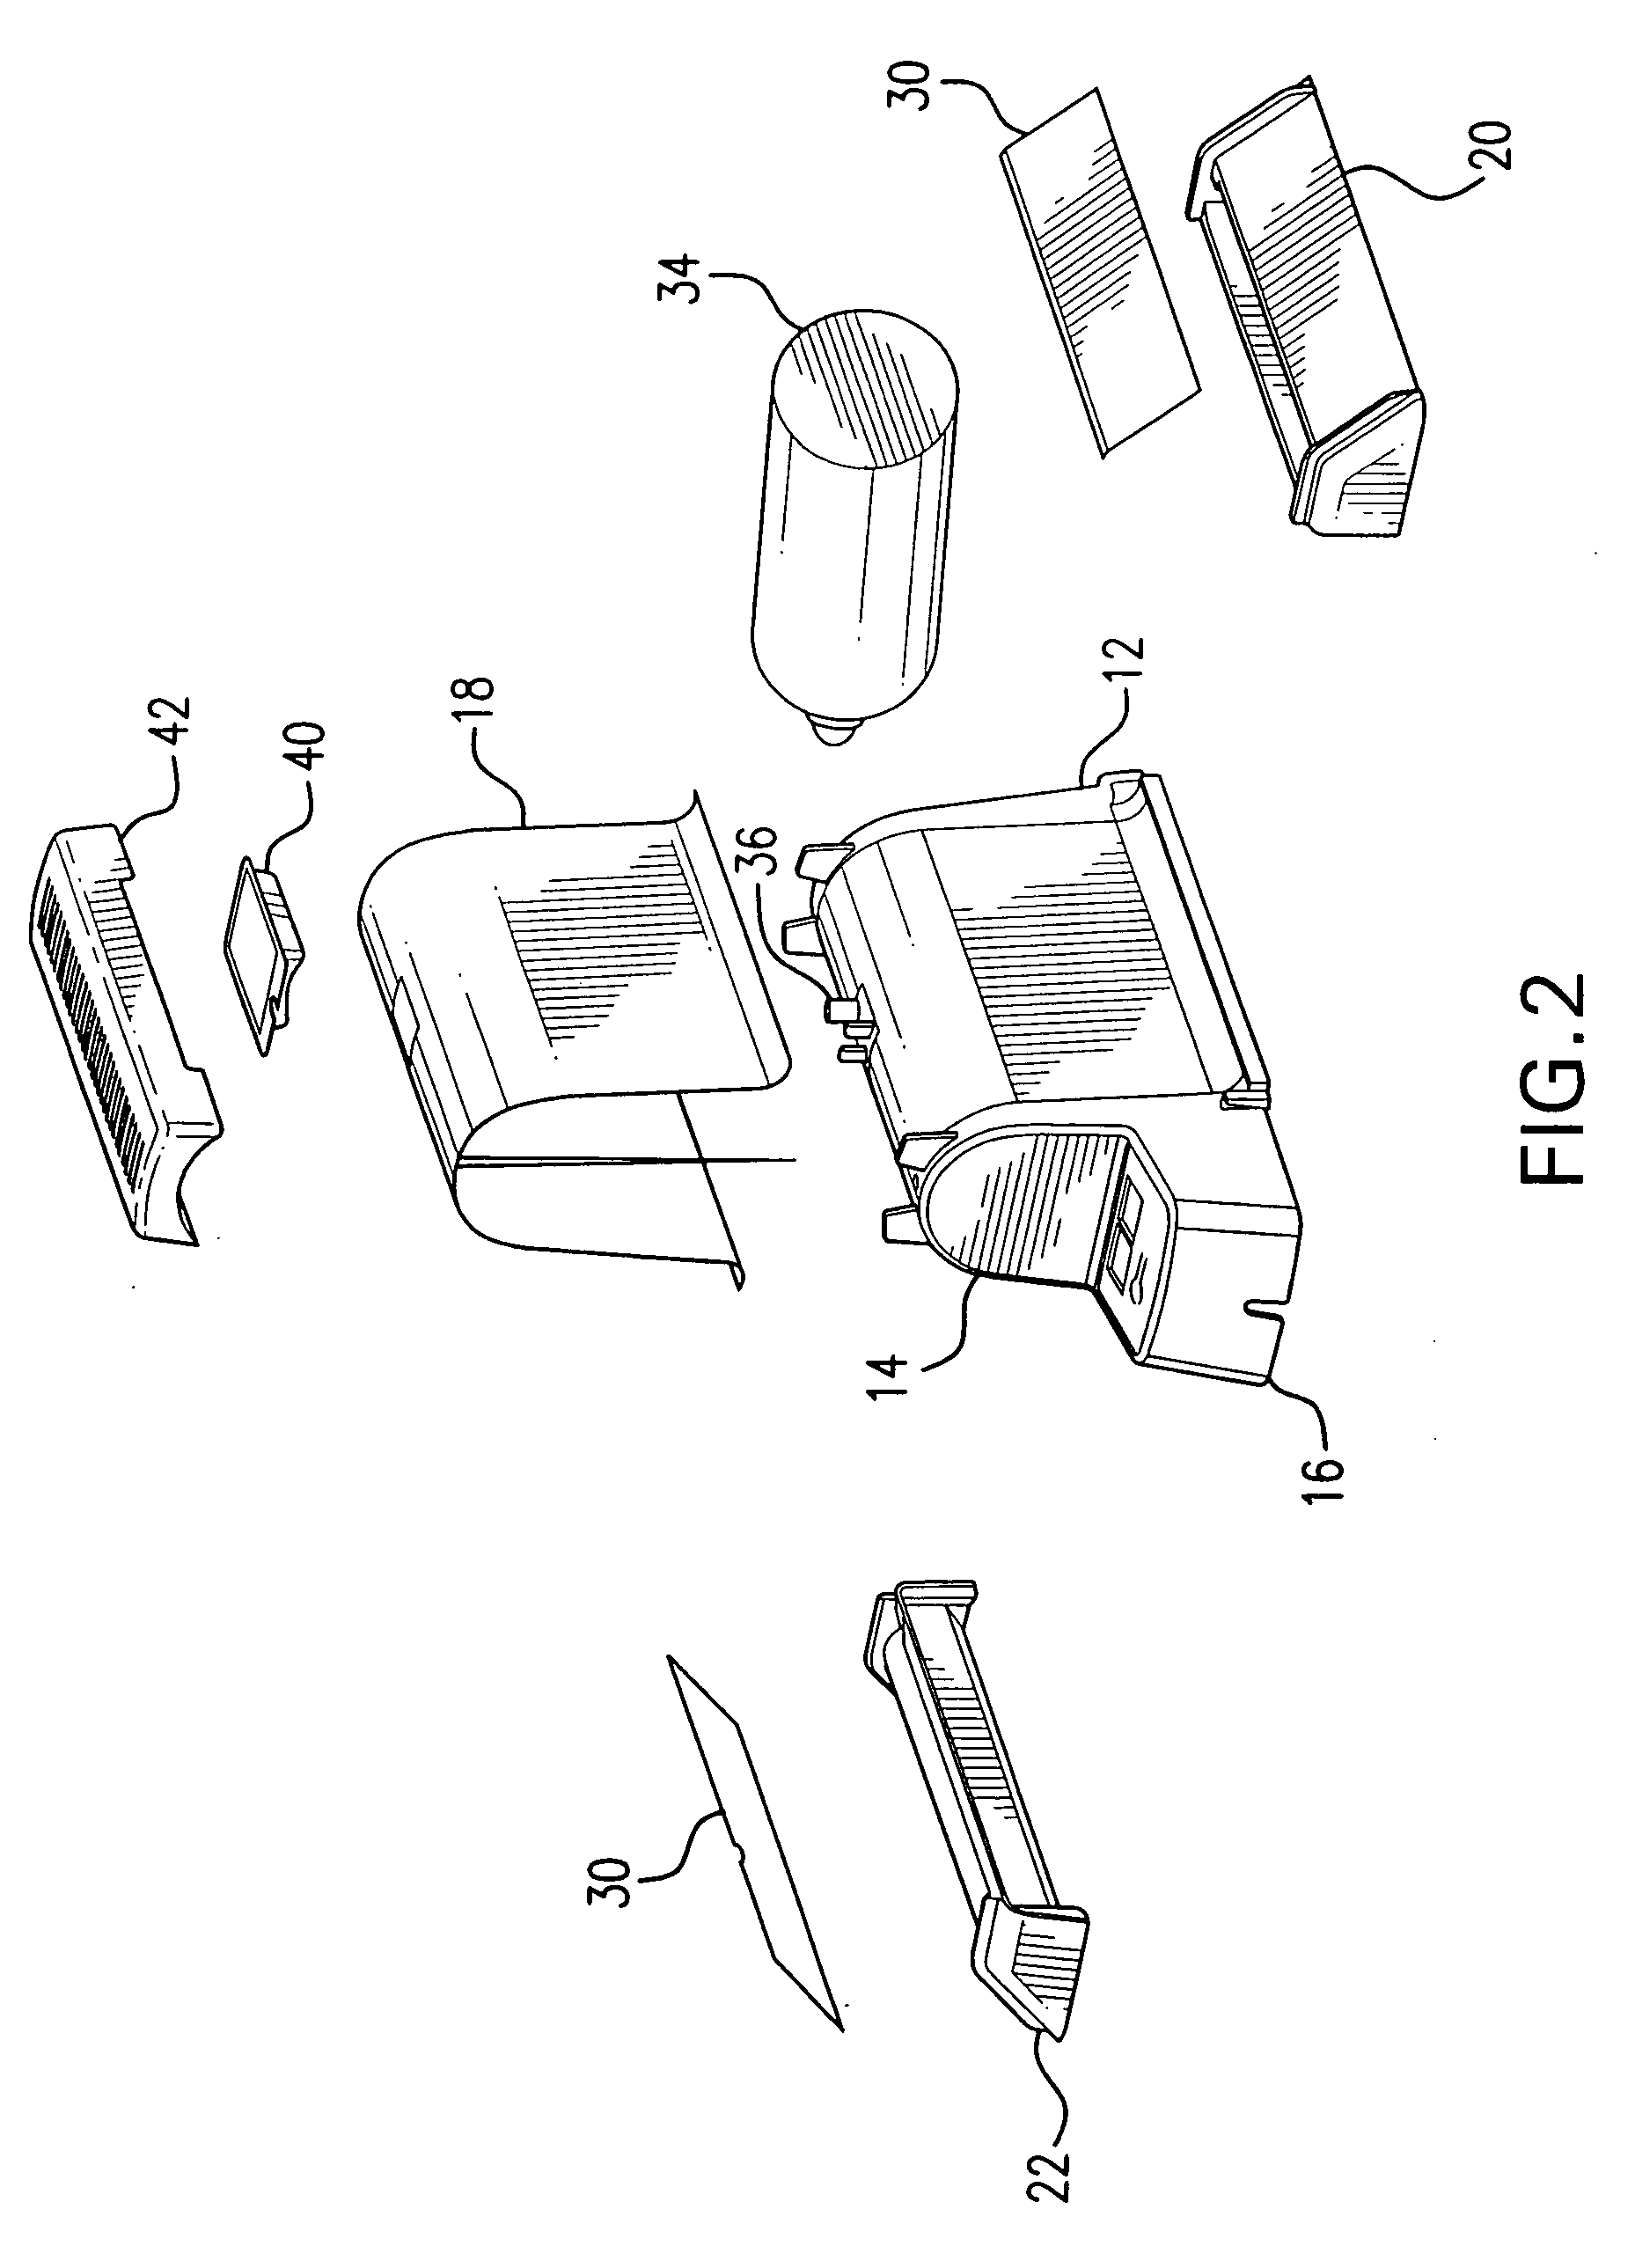 Methods, apparatus and compositions for abatement of bed bugs